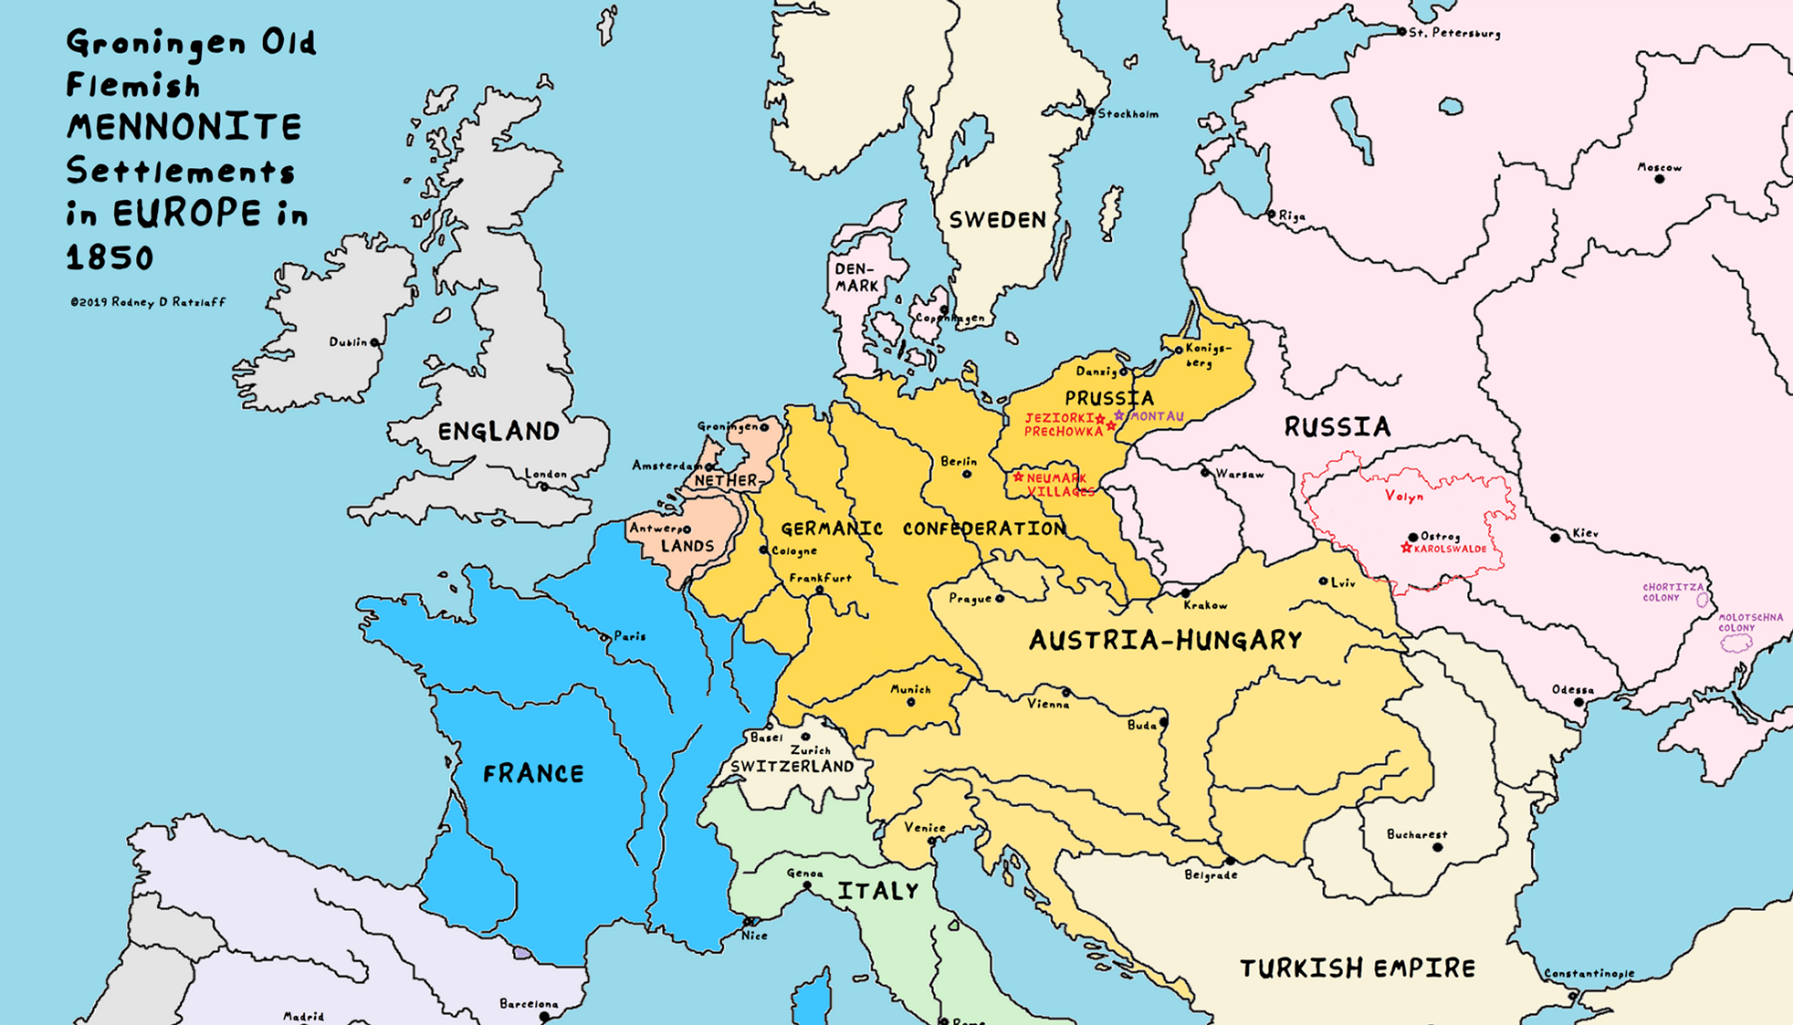 Europe about 1850 showing location of Volyn Gubernia within the Russian Empire ©Rodney D. Ratzlaff, 2019.